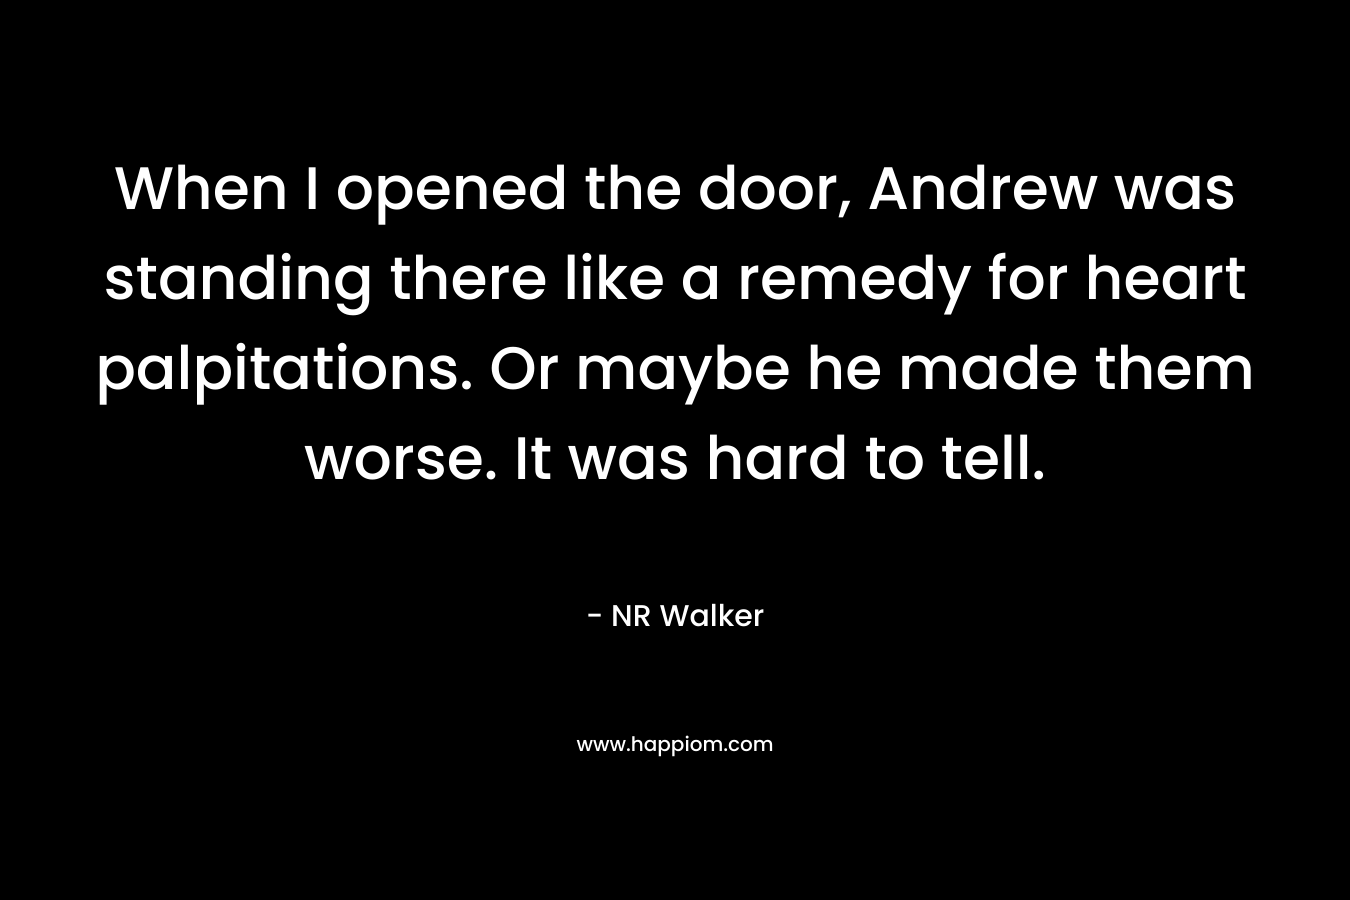 When I opened the door, Andrew was standing there like a remedy for heart palpitations. Or maybe he made them worse. It was hard to tell. – NR Walker